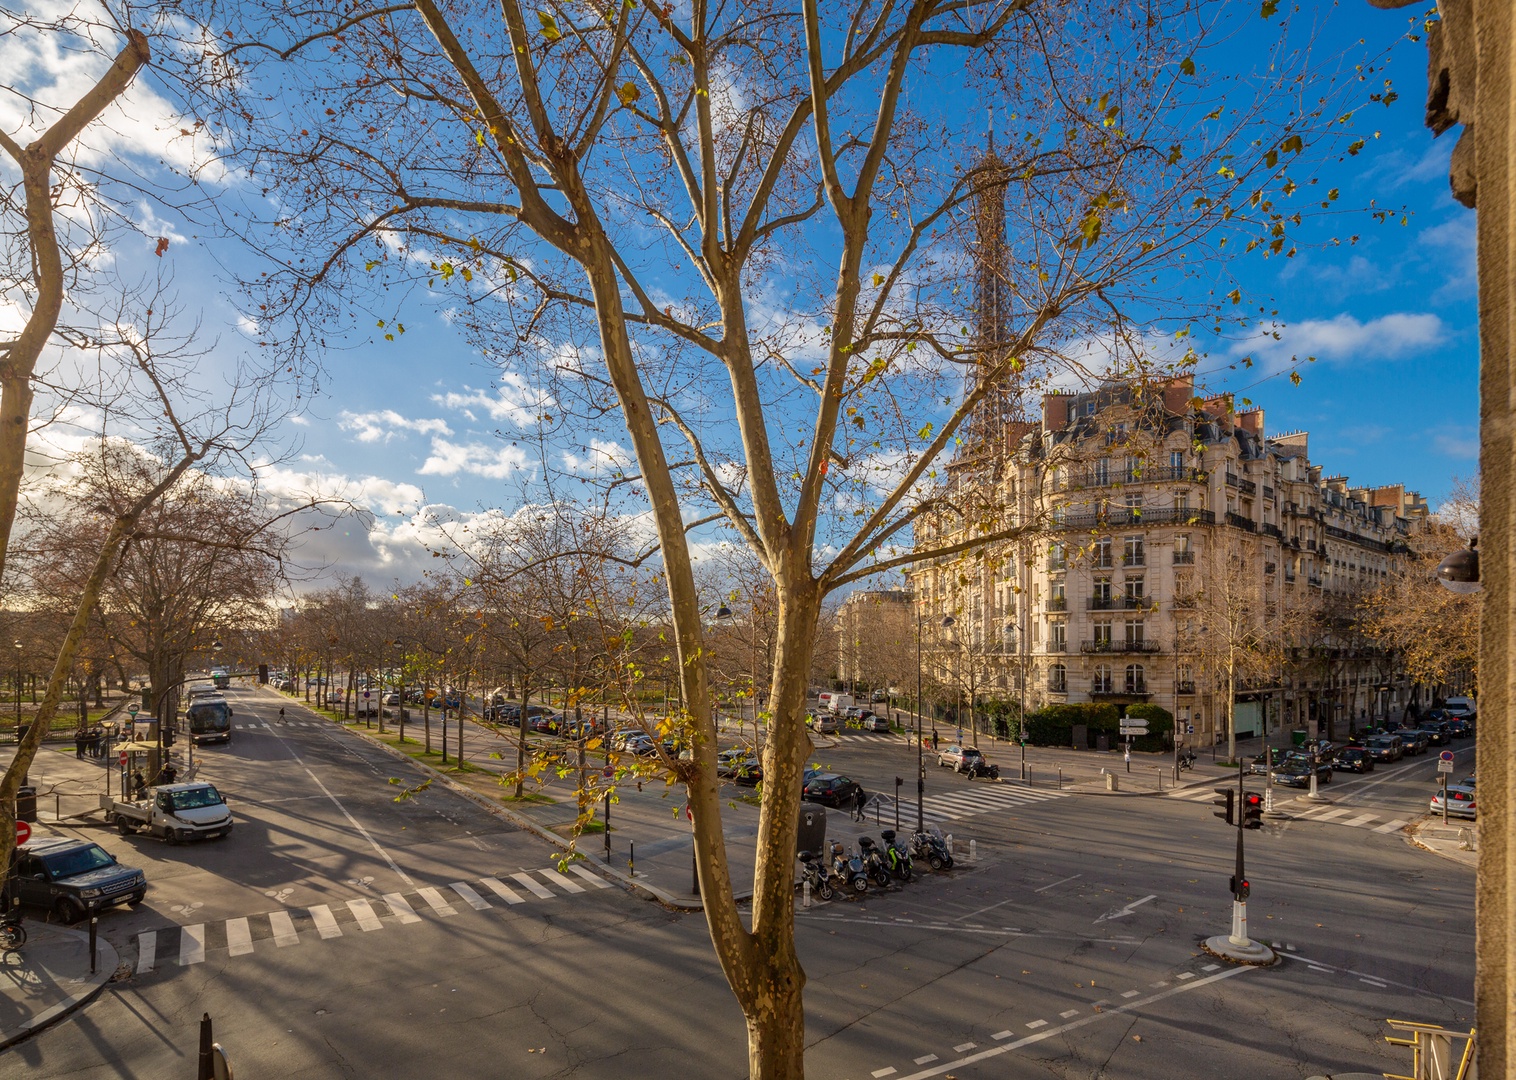 You're steps away from the Eiffel Tower and some of the best Parisian streets with boutiques and outdoor cafés.